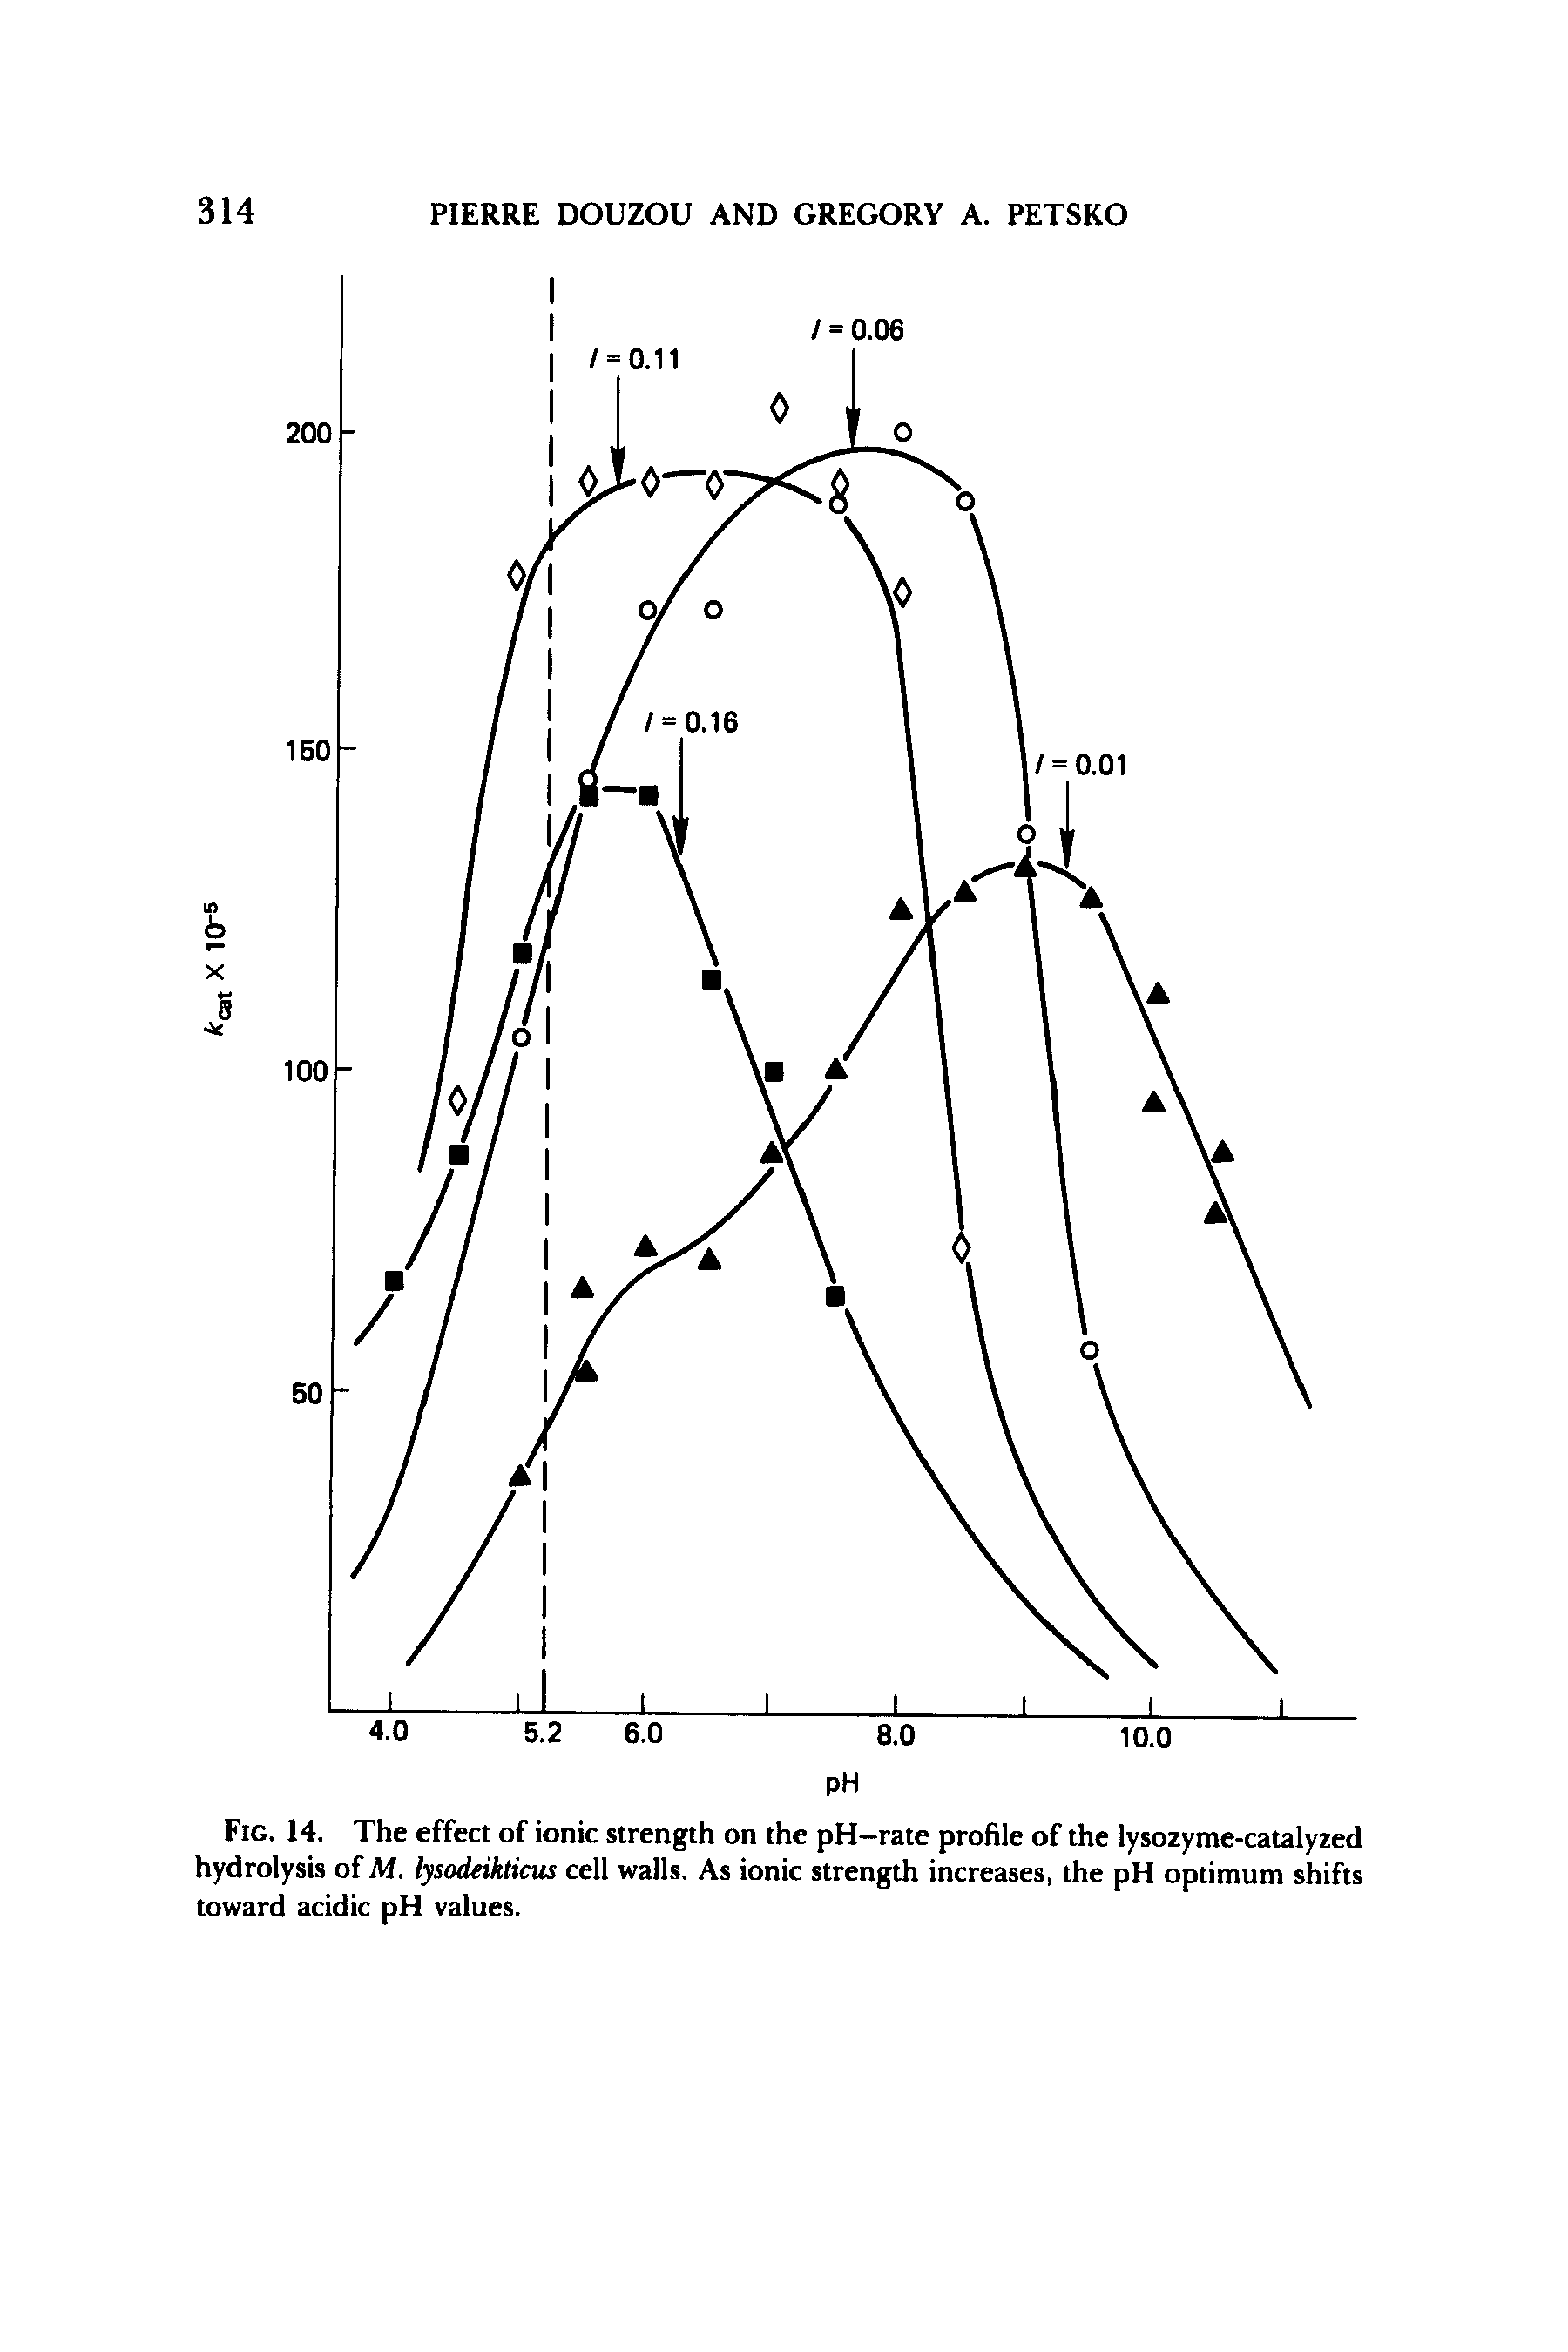 Fig. 14. The effect of ionic strength on the pH-rate profile of the lysozyme-catalyzed hydrolysis ofM. lysodeikticus cell walls. As ionic strength increases, the pH optimum shifts toward acidic pH values.